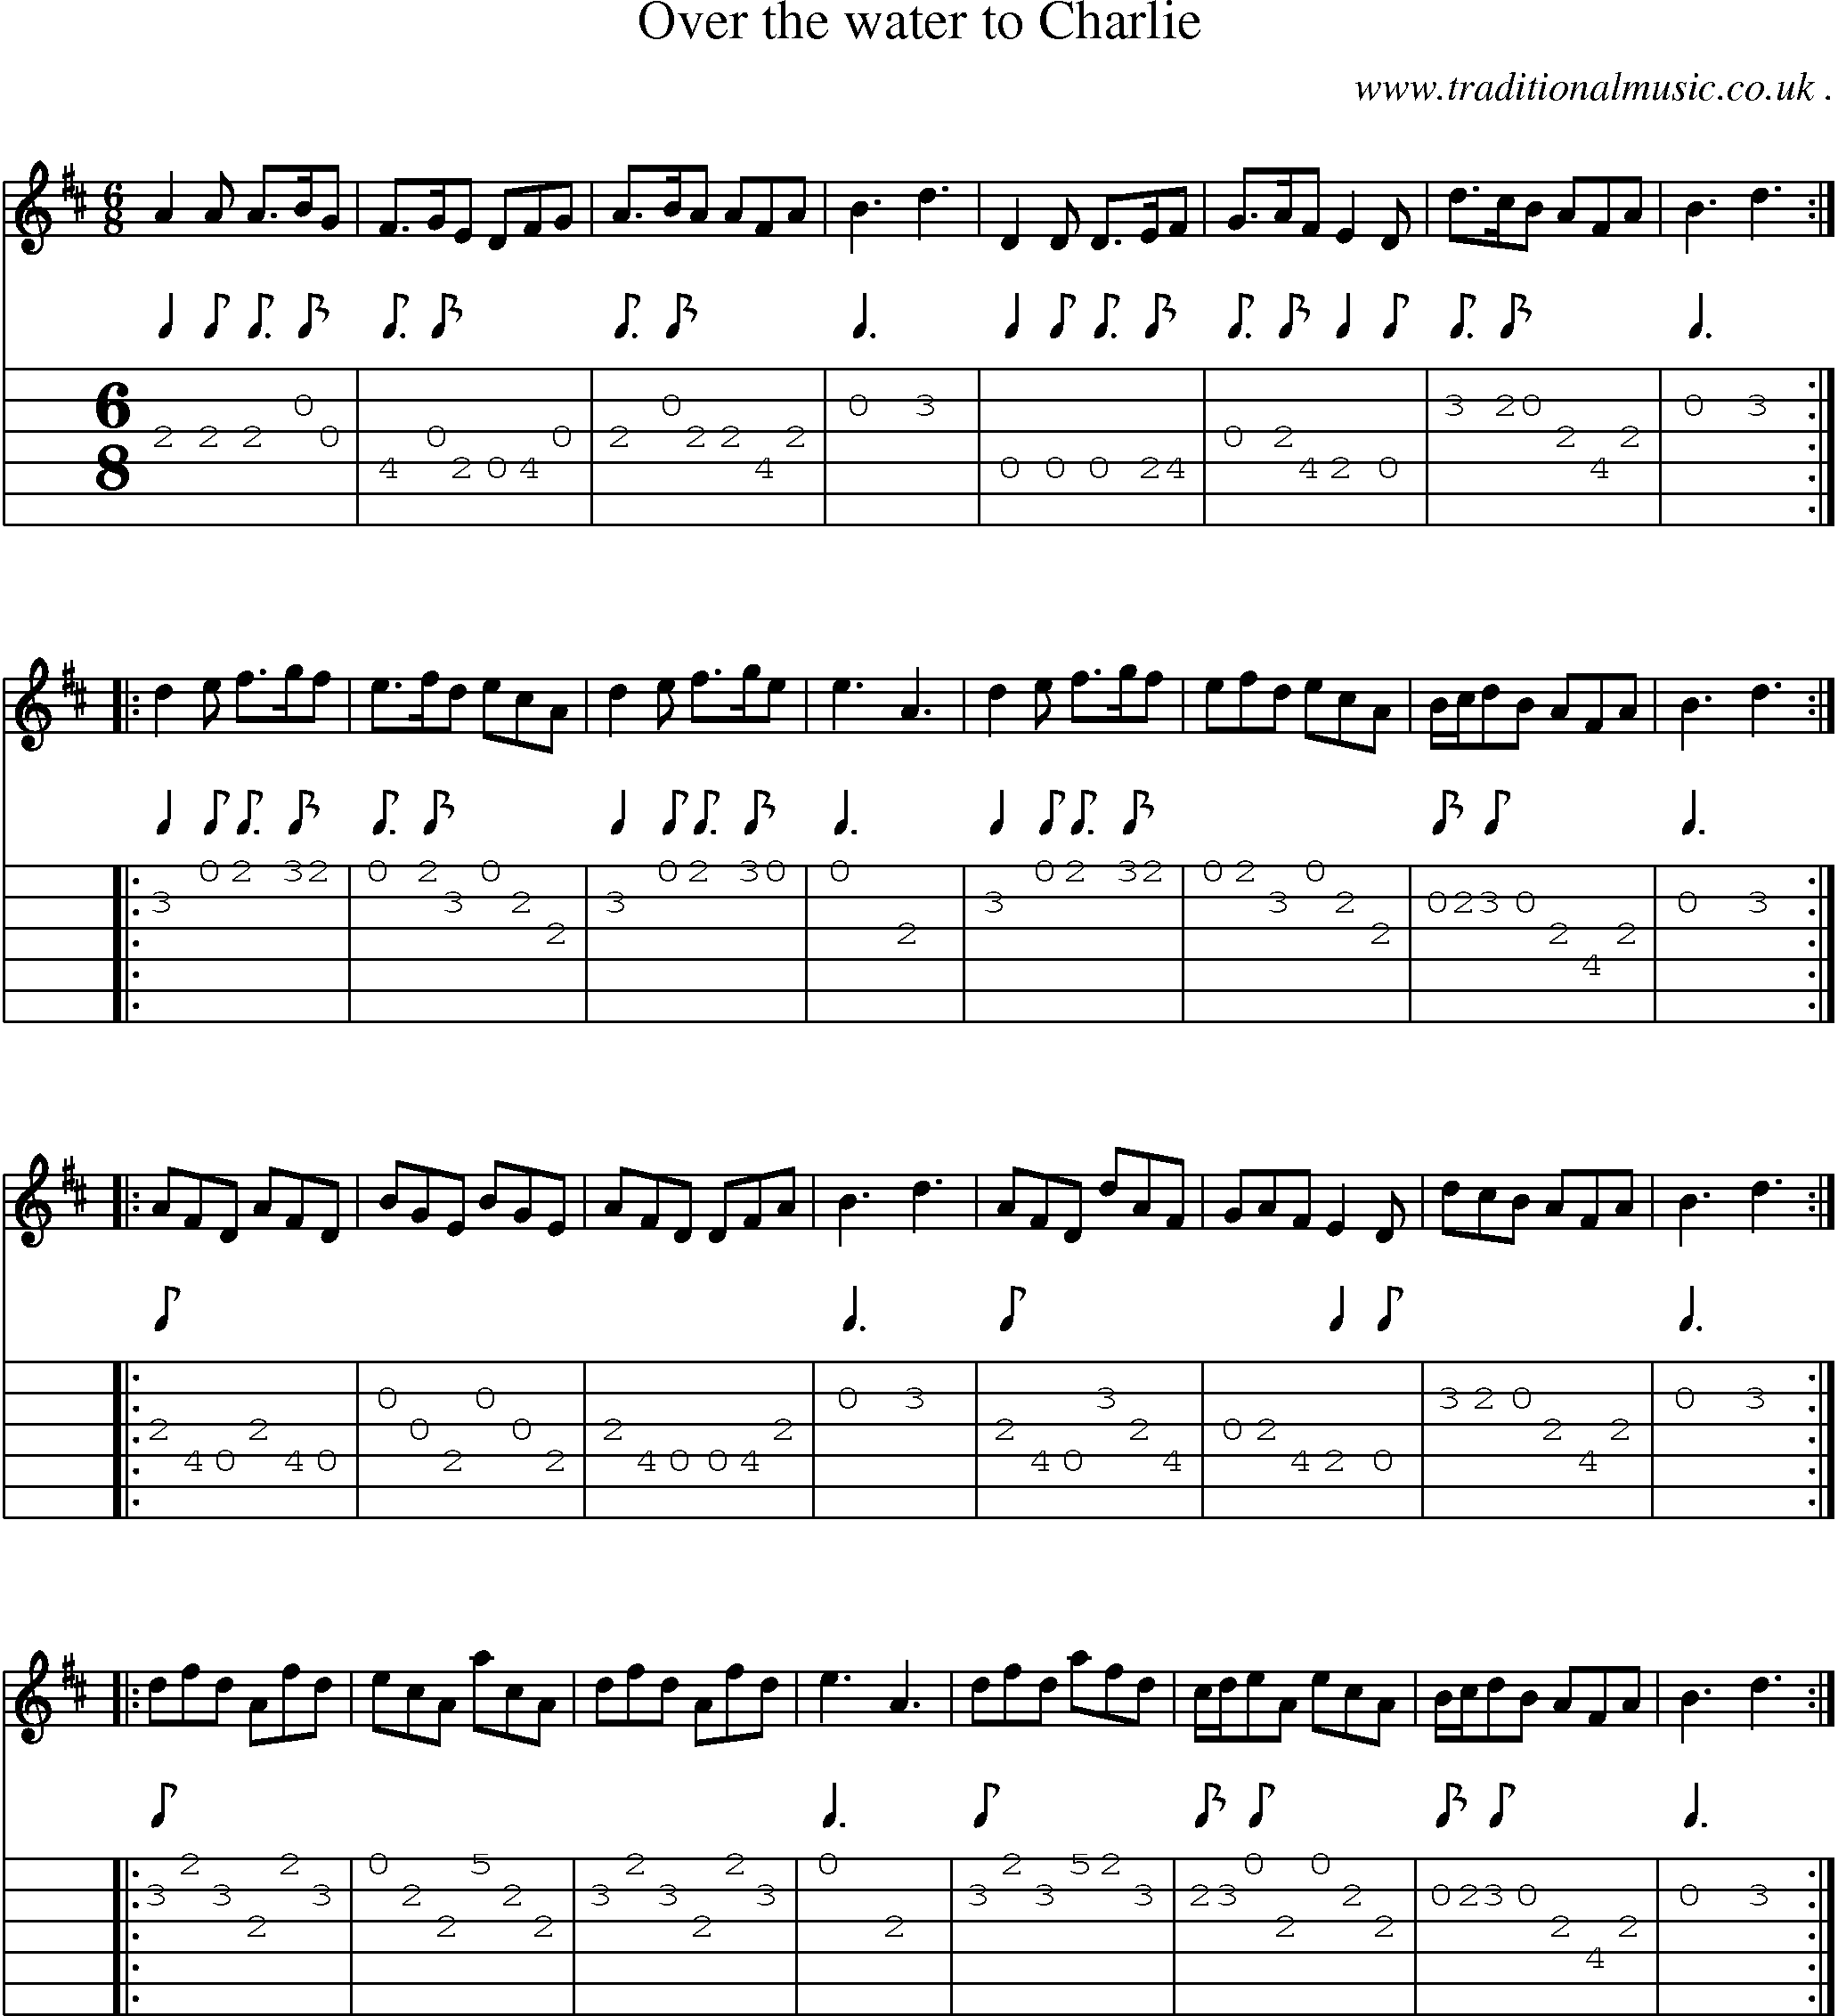 Sheet-music  score, Chords and Guitar Tabs for Over The Water To Charlie